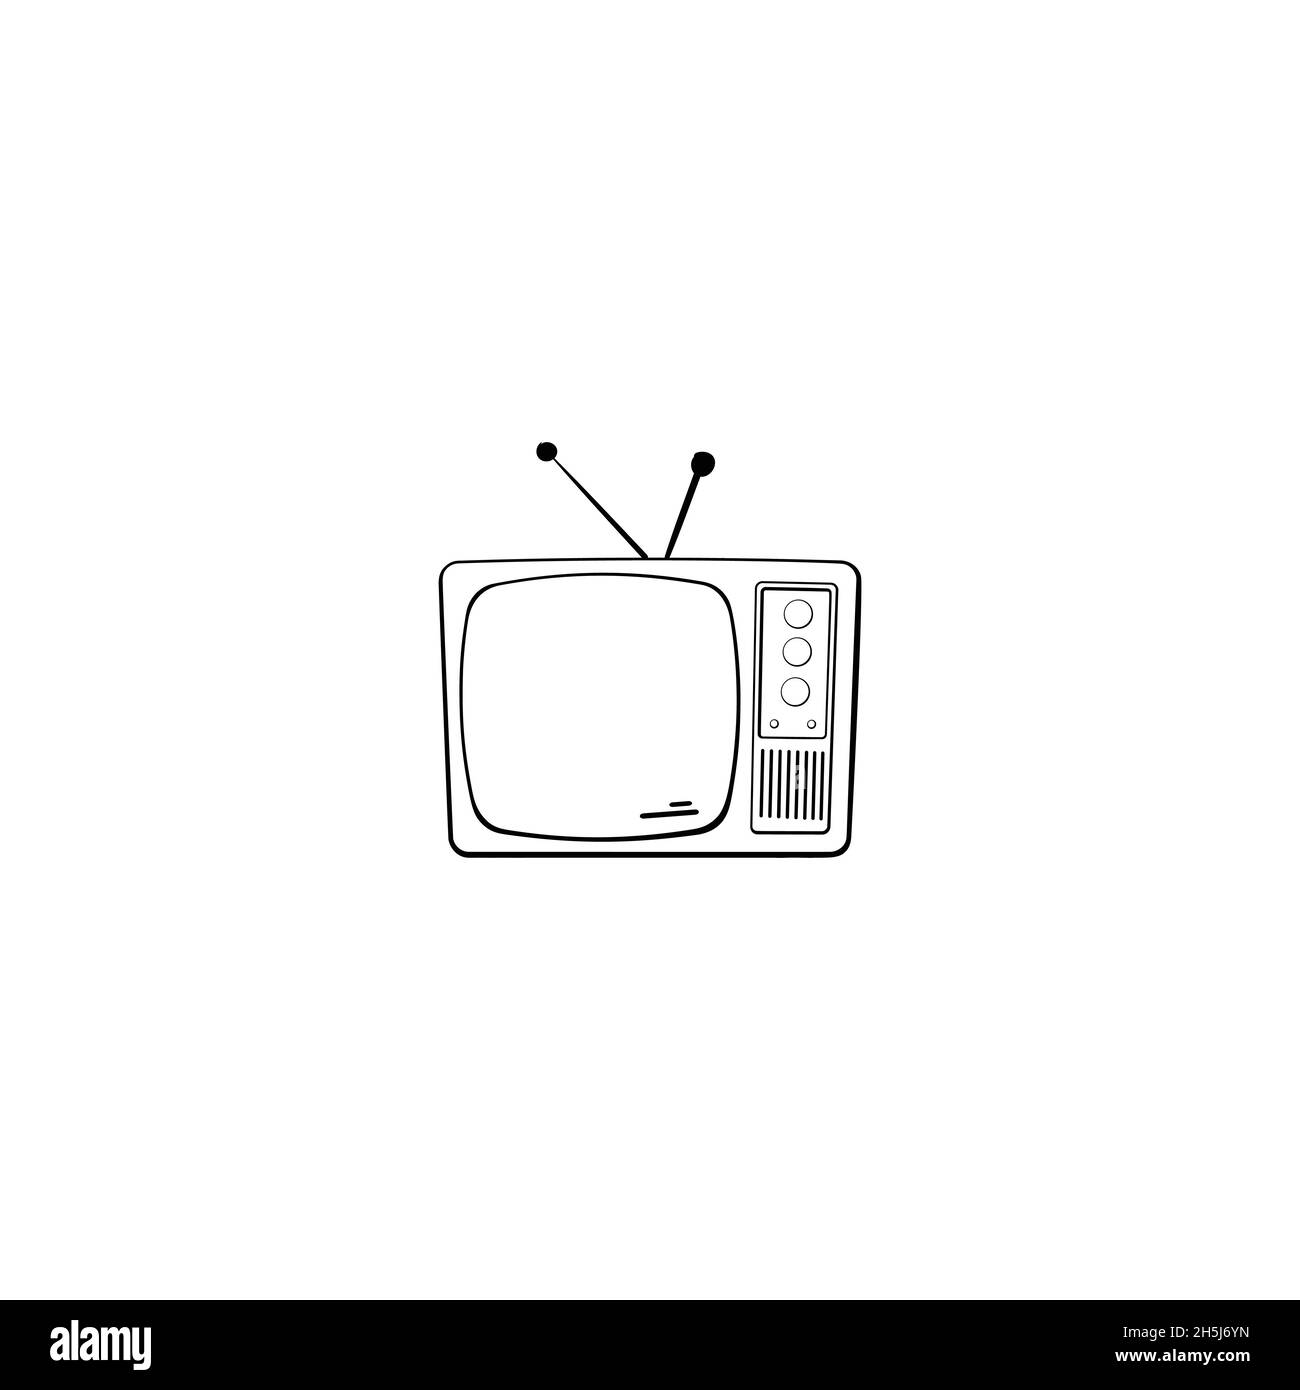 Hand Drawn television doodle illustration icon. Outline hand drawn tv vector icon illustrations isolated on white background. Stock Vector